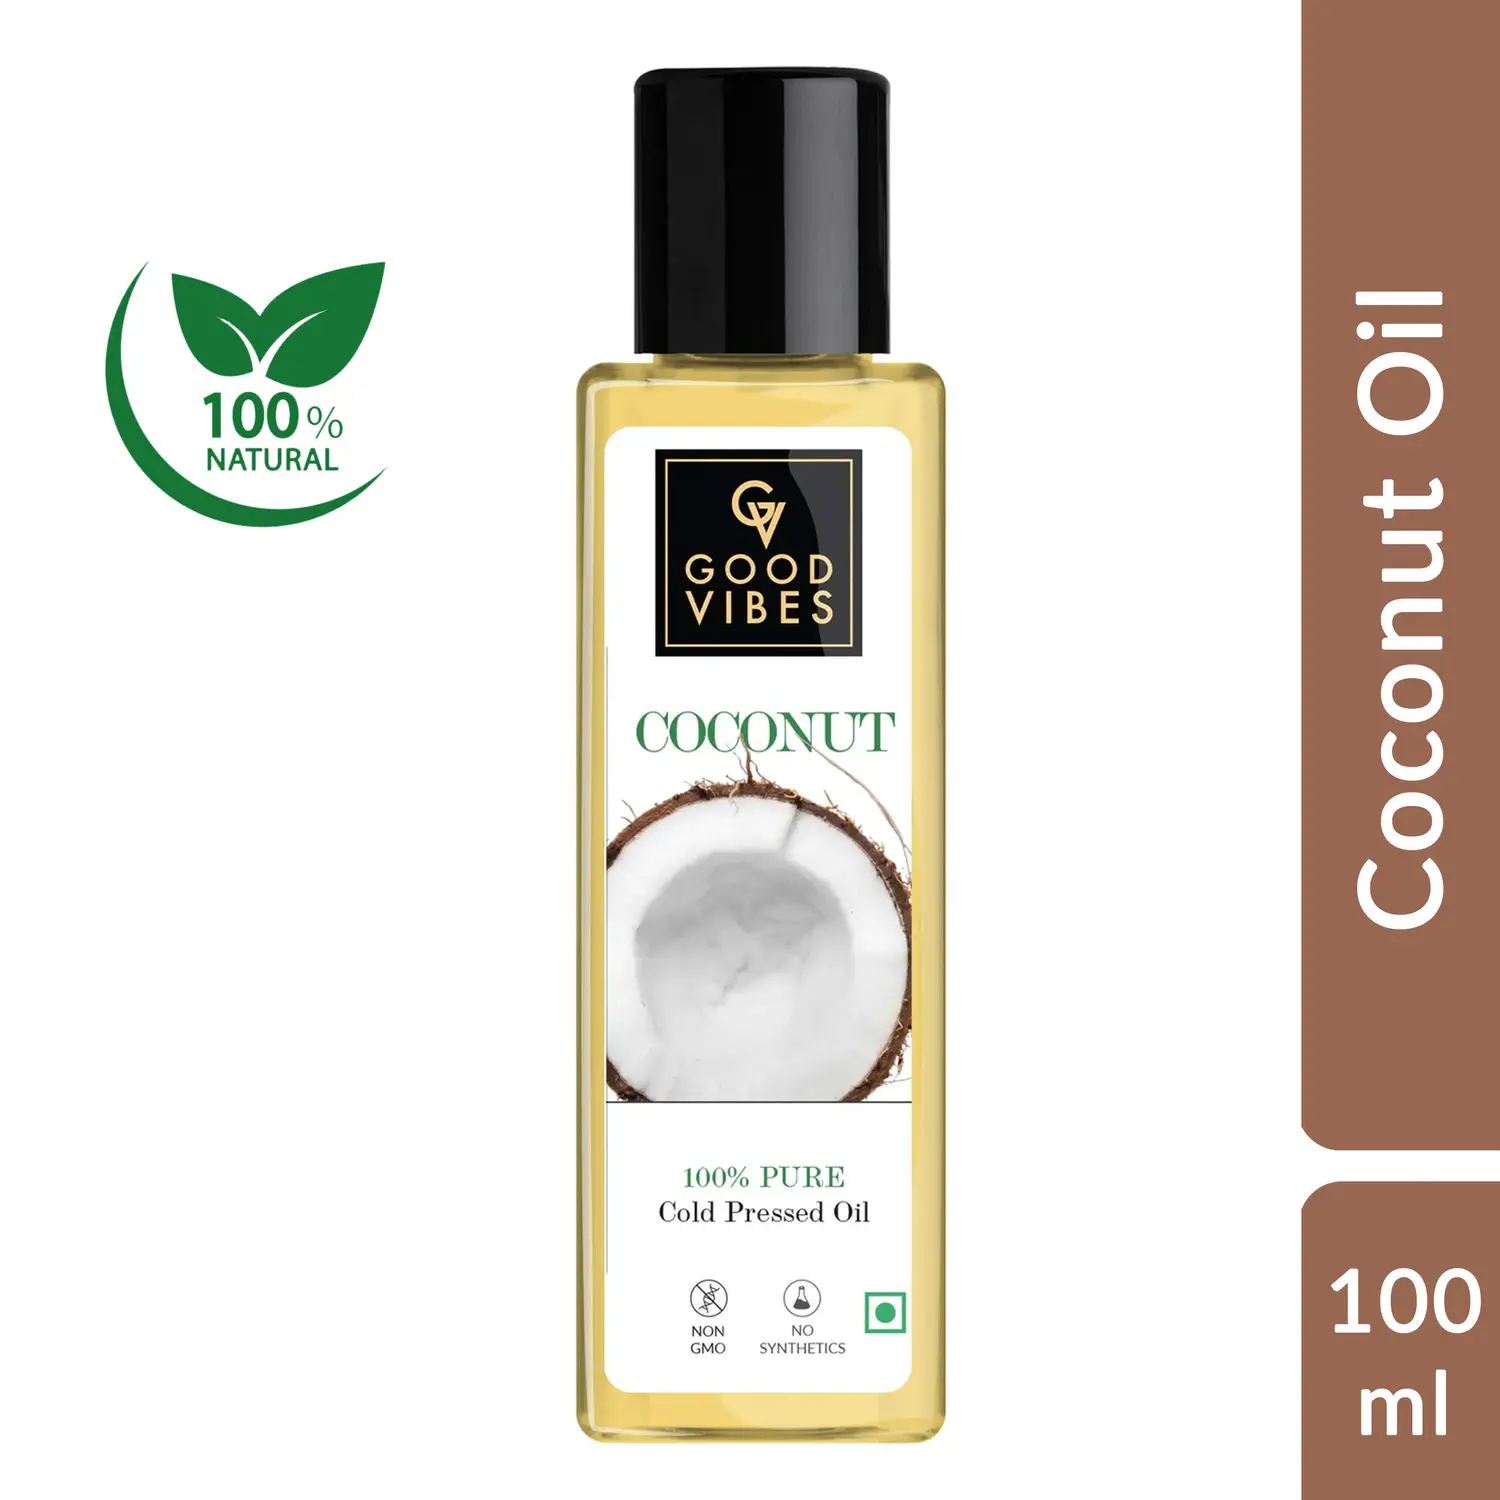 Good Vibes Coconut 100% Pure Cold Pressed Carrier Oil For Hair & Skin | Hair Growth, Anti-Ageing | No Parabens, No Animal Testing (100 ml)